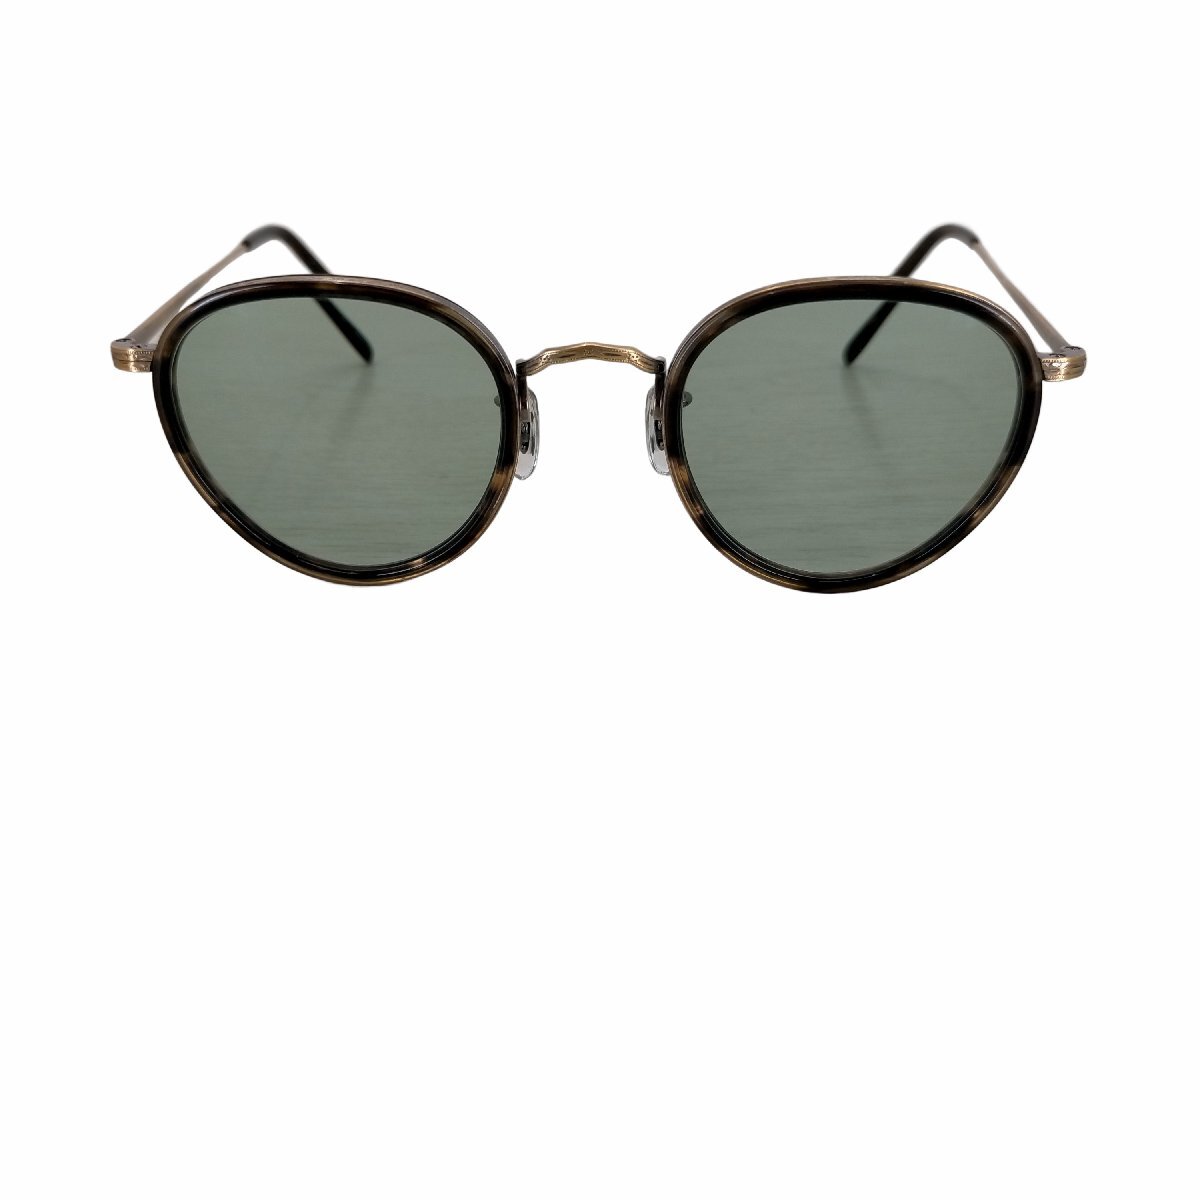 OLIVER PEOPLES(オリバーピープルズ) Limited Edition coco2 雅 メンズ 中古 古着 0148